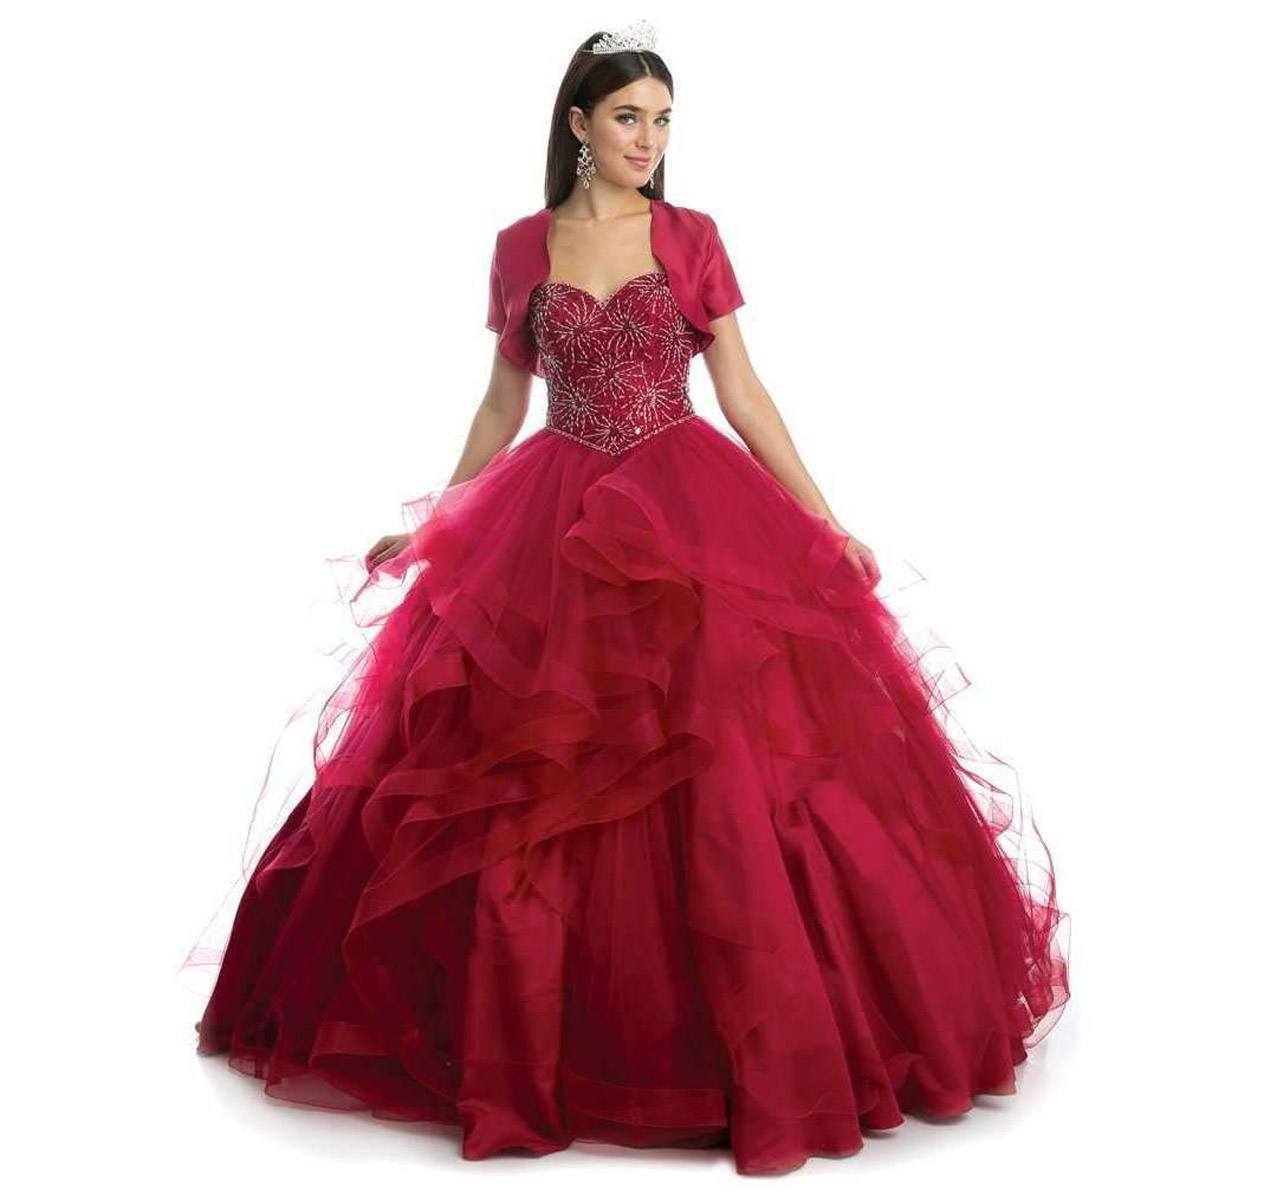 Juliet 1425 Beaded Bodice Quinceanera Tulle Ball Gown Burgundy Detachable Sleeves